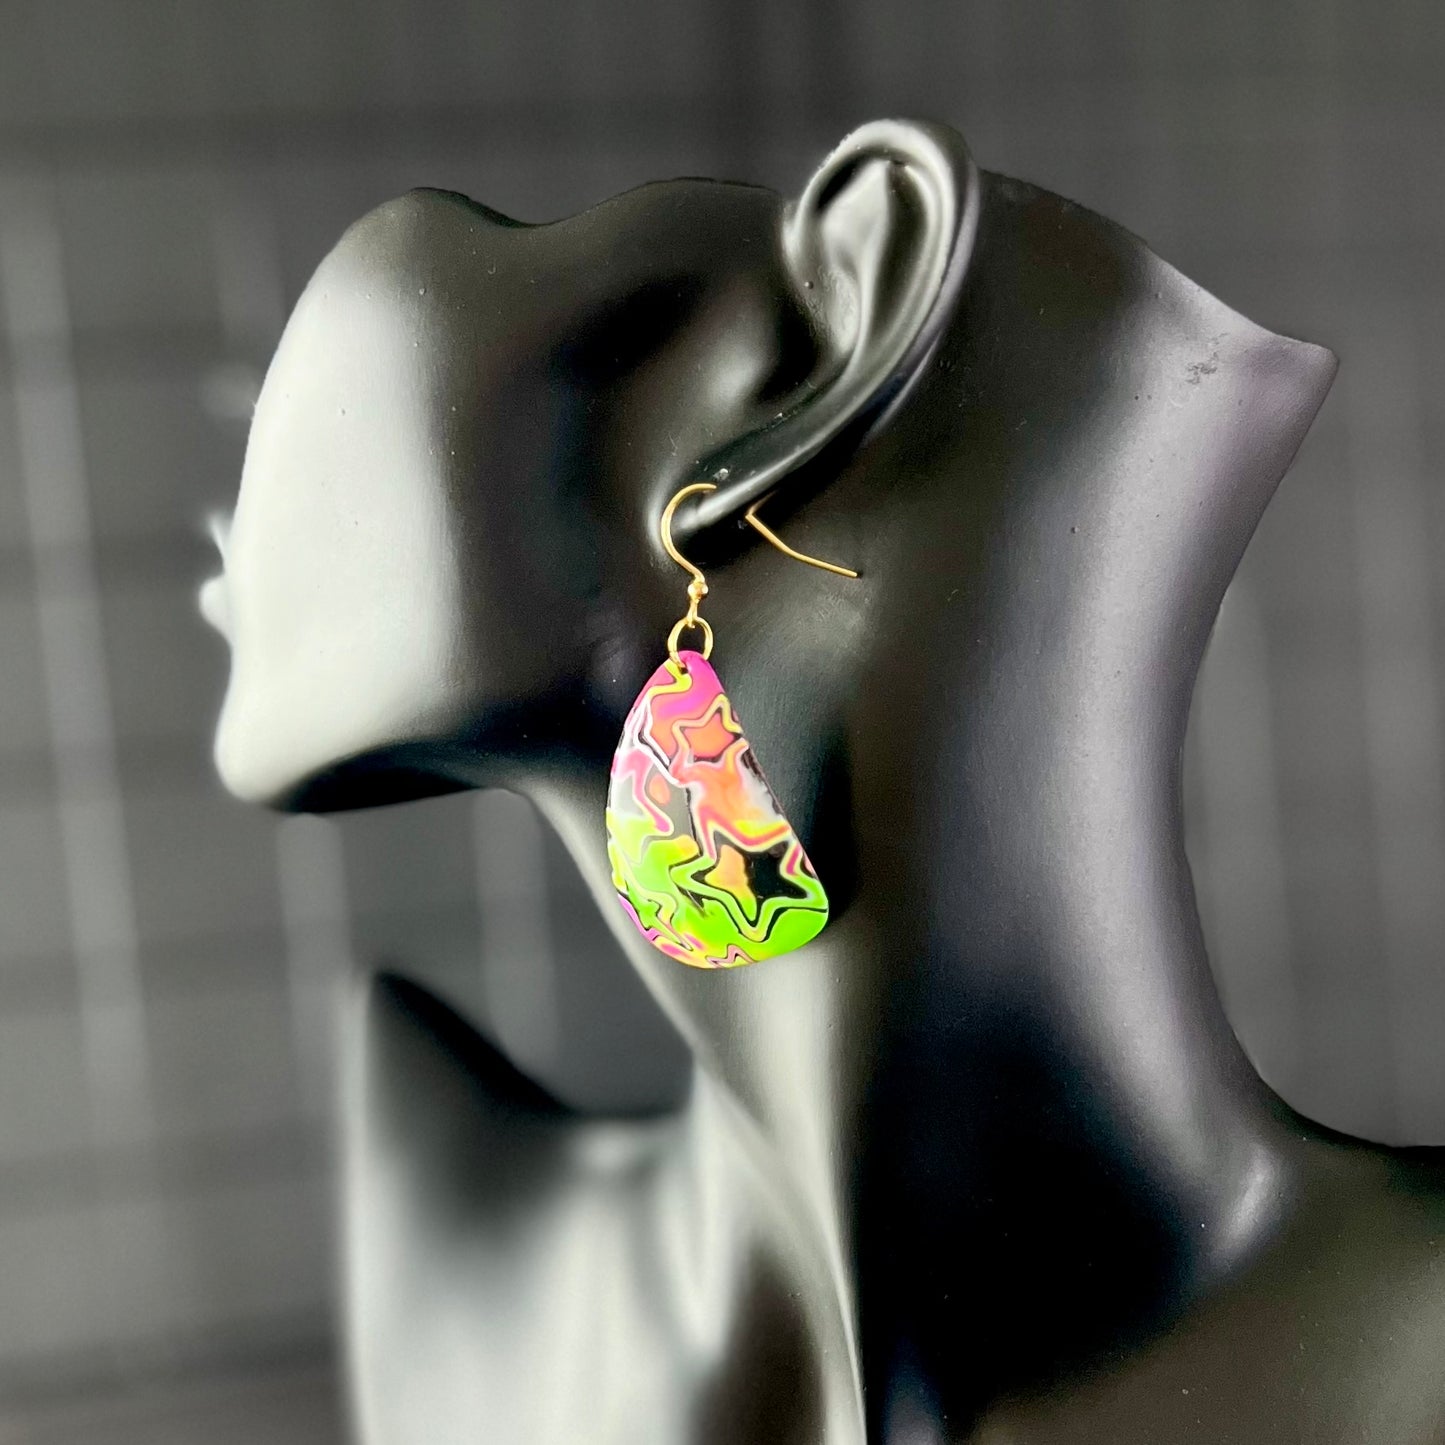 Large domed triangles, psychedelic stars, green yellow orange pink, handmade earrings